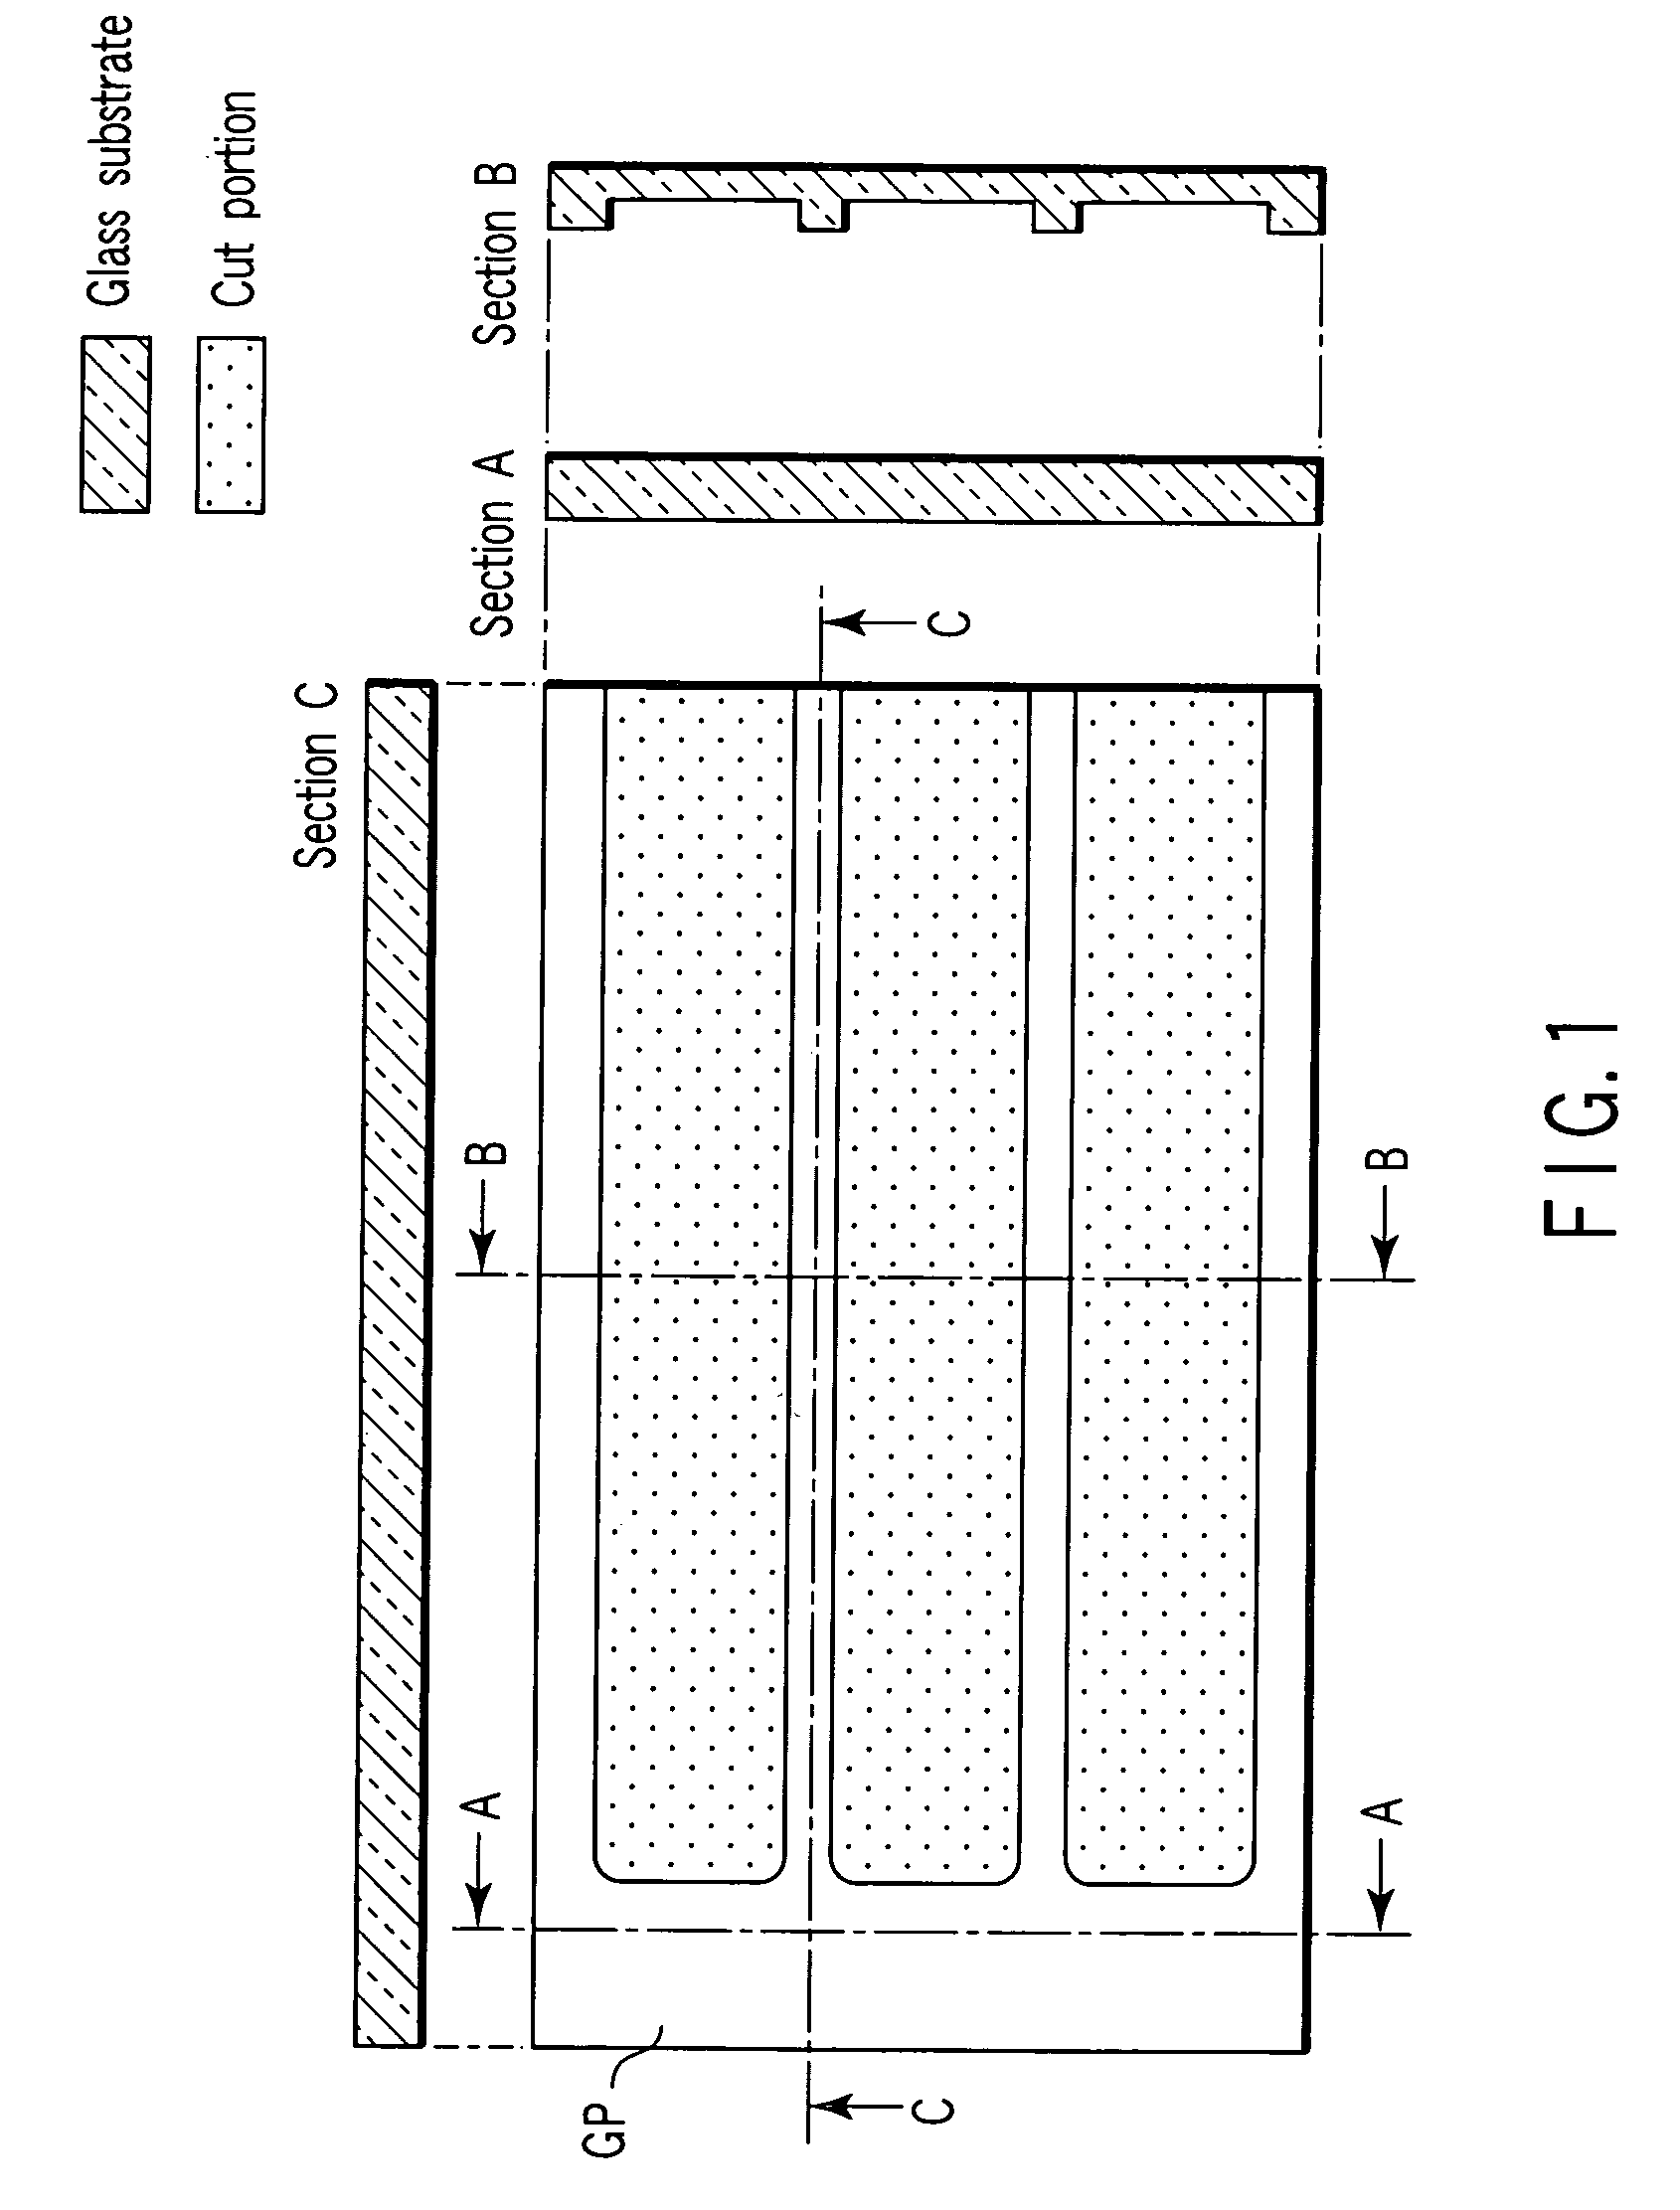 Specimen stage array for scanning probe microscope